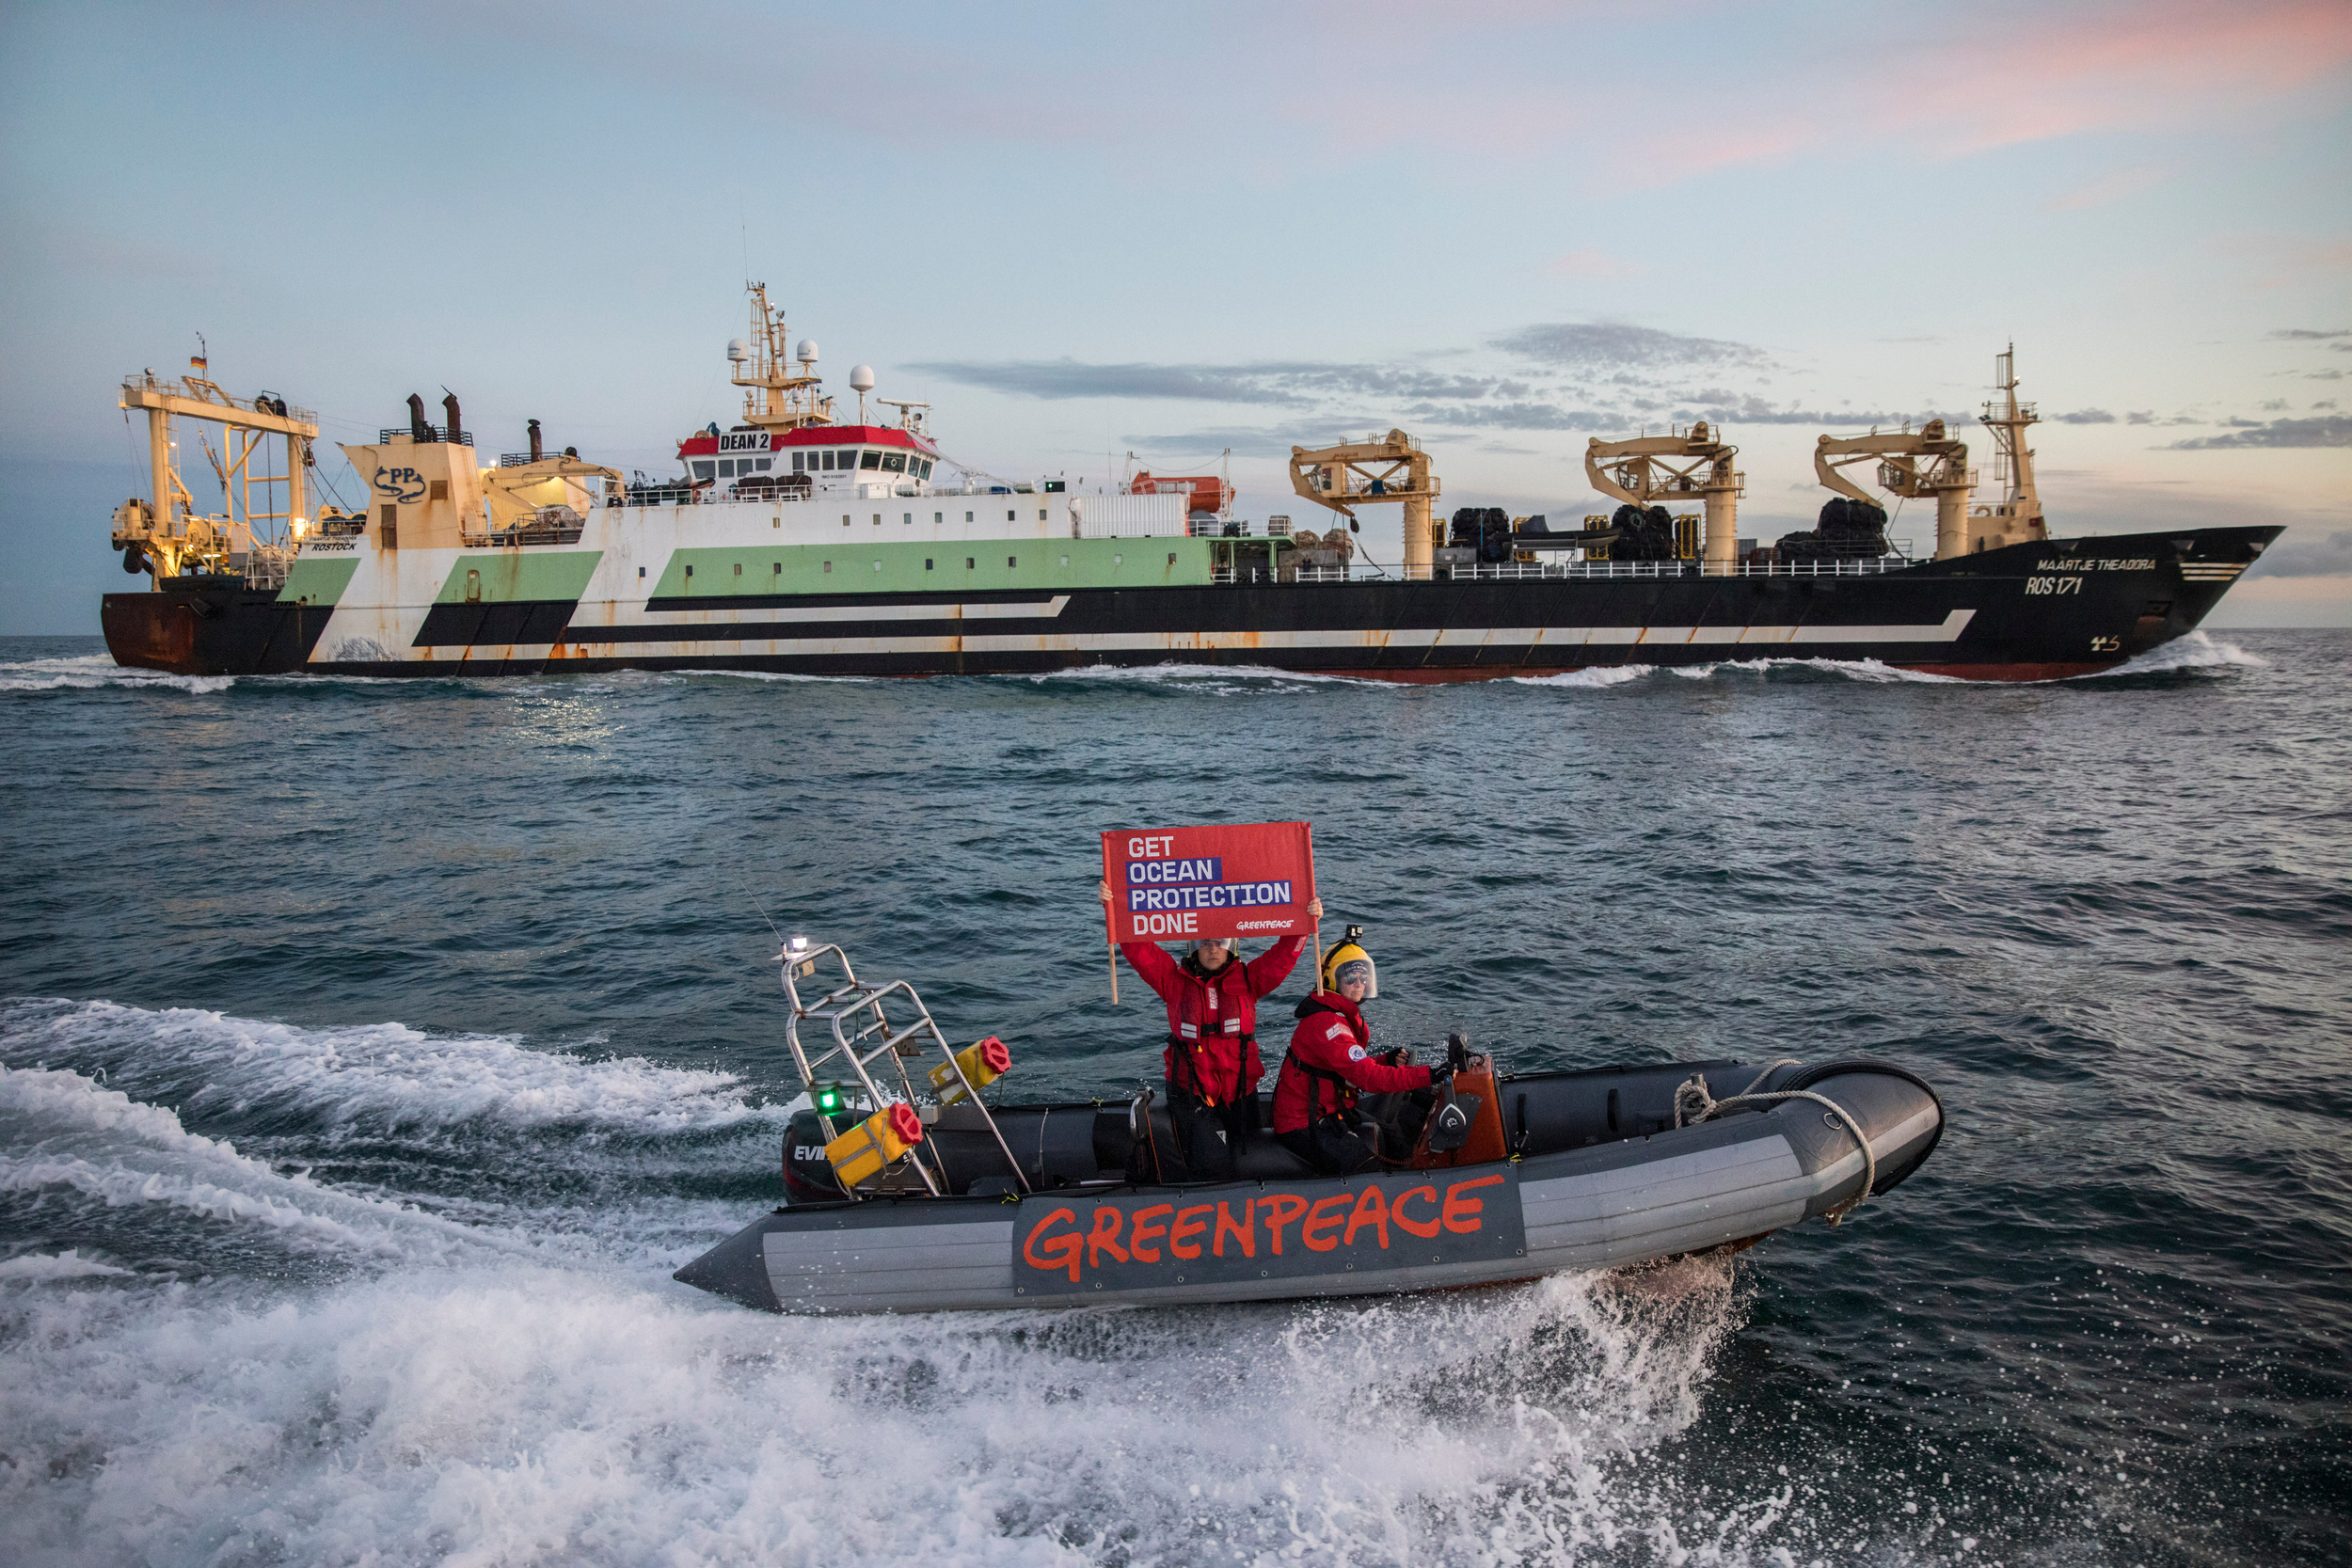 Two people on a speed boat, with "Greenpeace" on the side, sail past a huge industrial fishing ship. One person in the speedboat holds a banner saying "Get Ocean Protection Done".